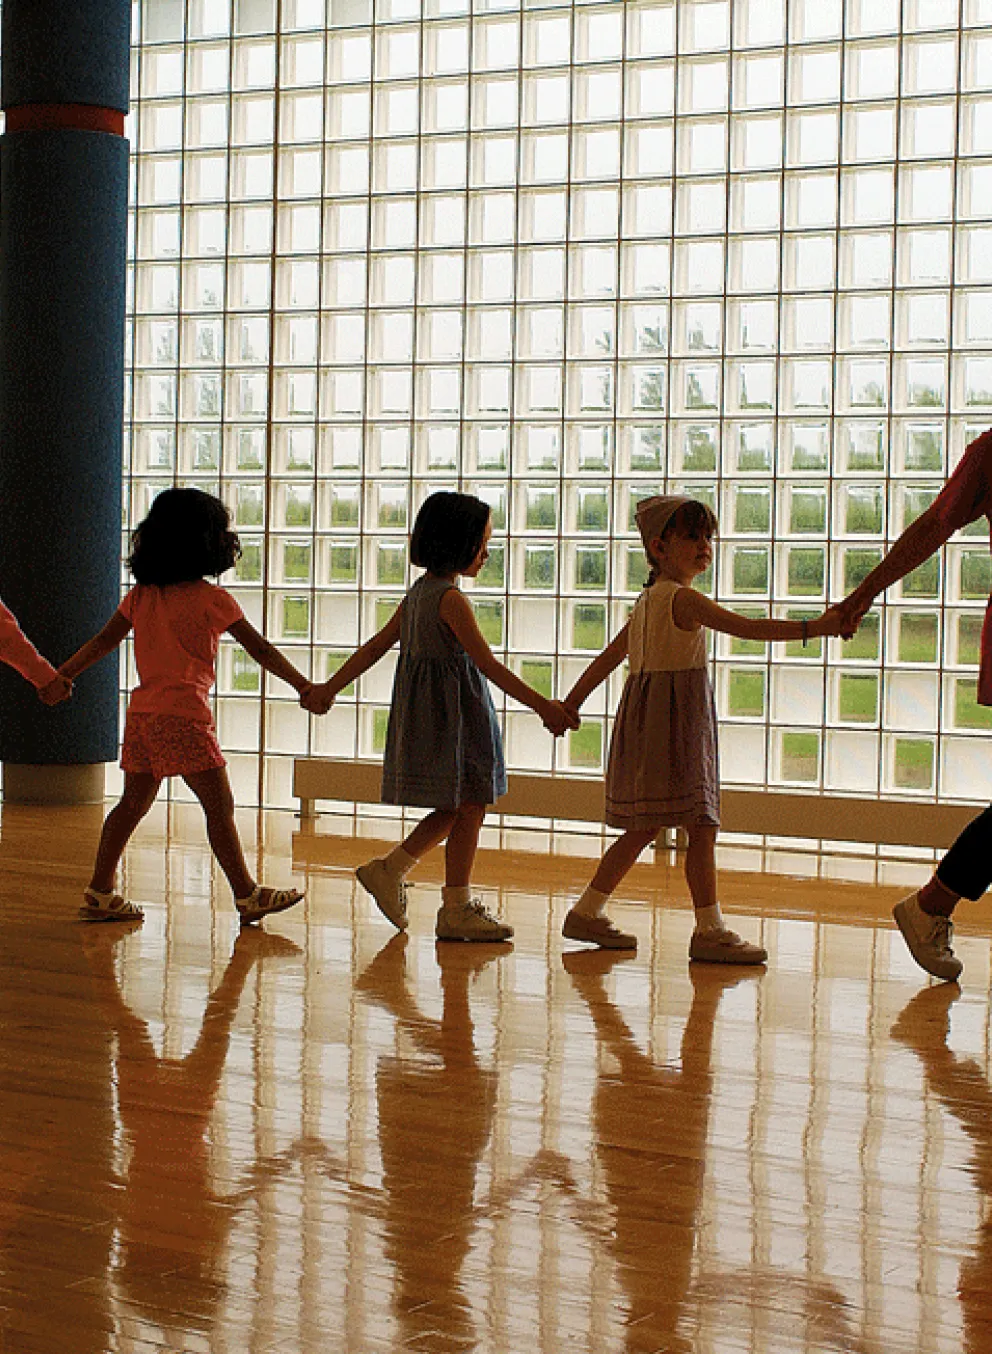 A teacher leads a line of children holding hands in a gymnasium